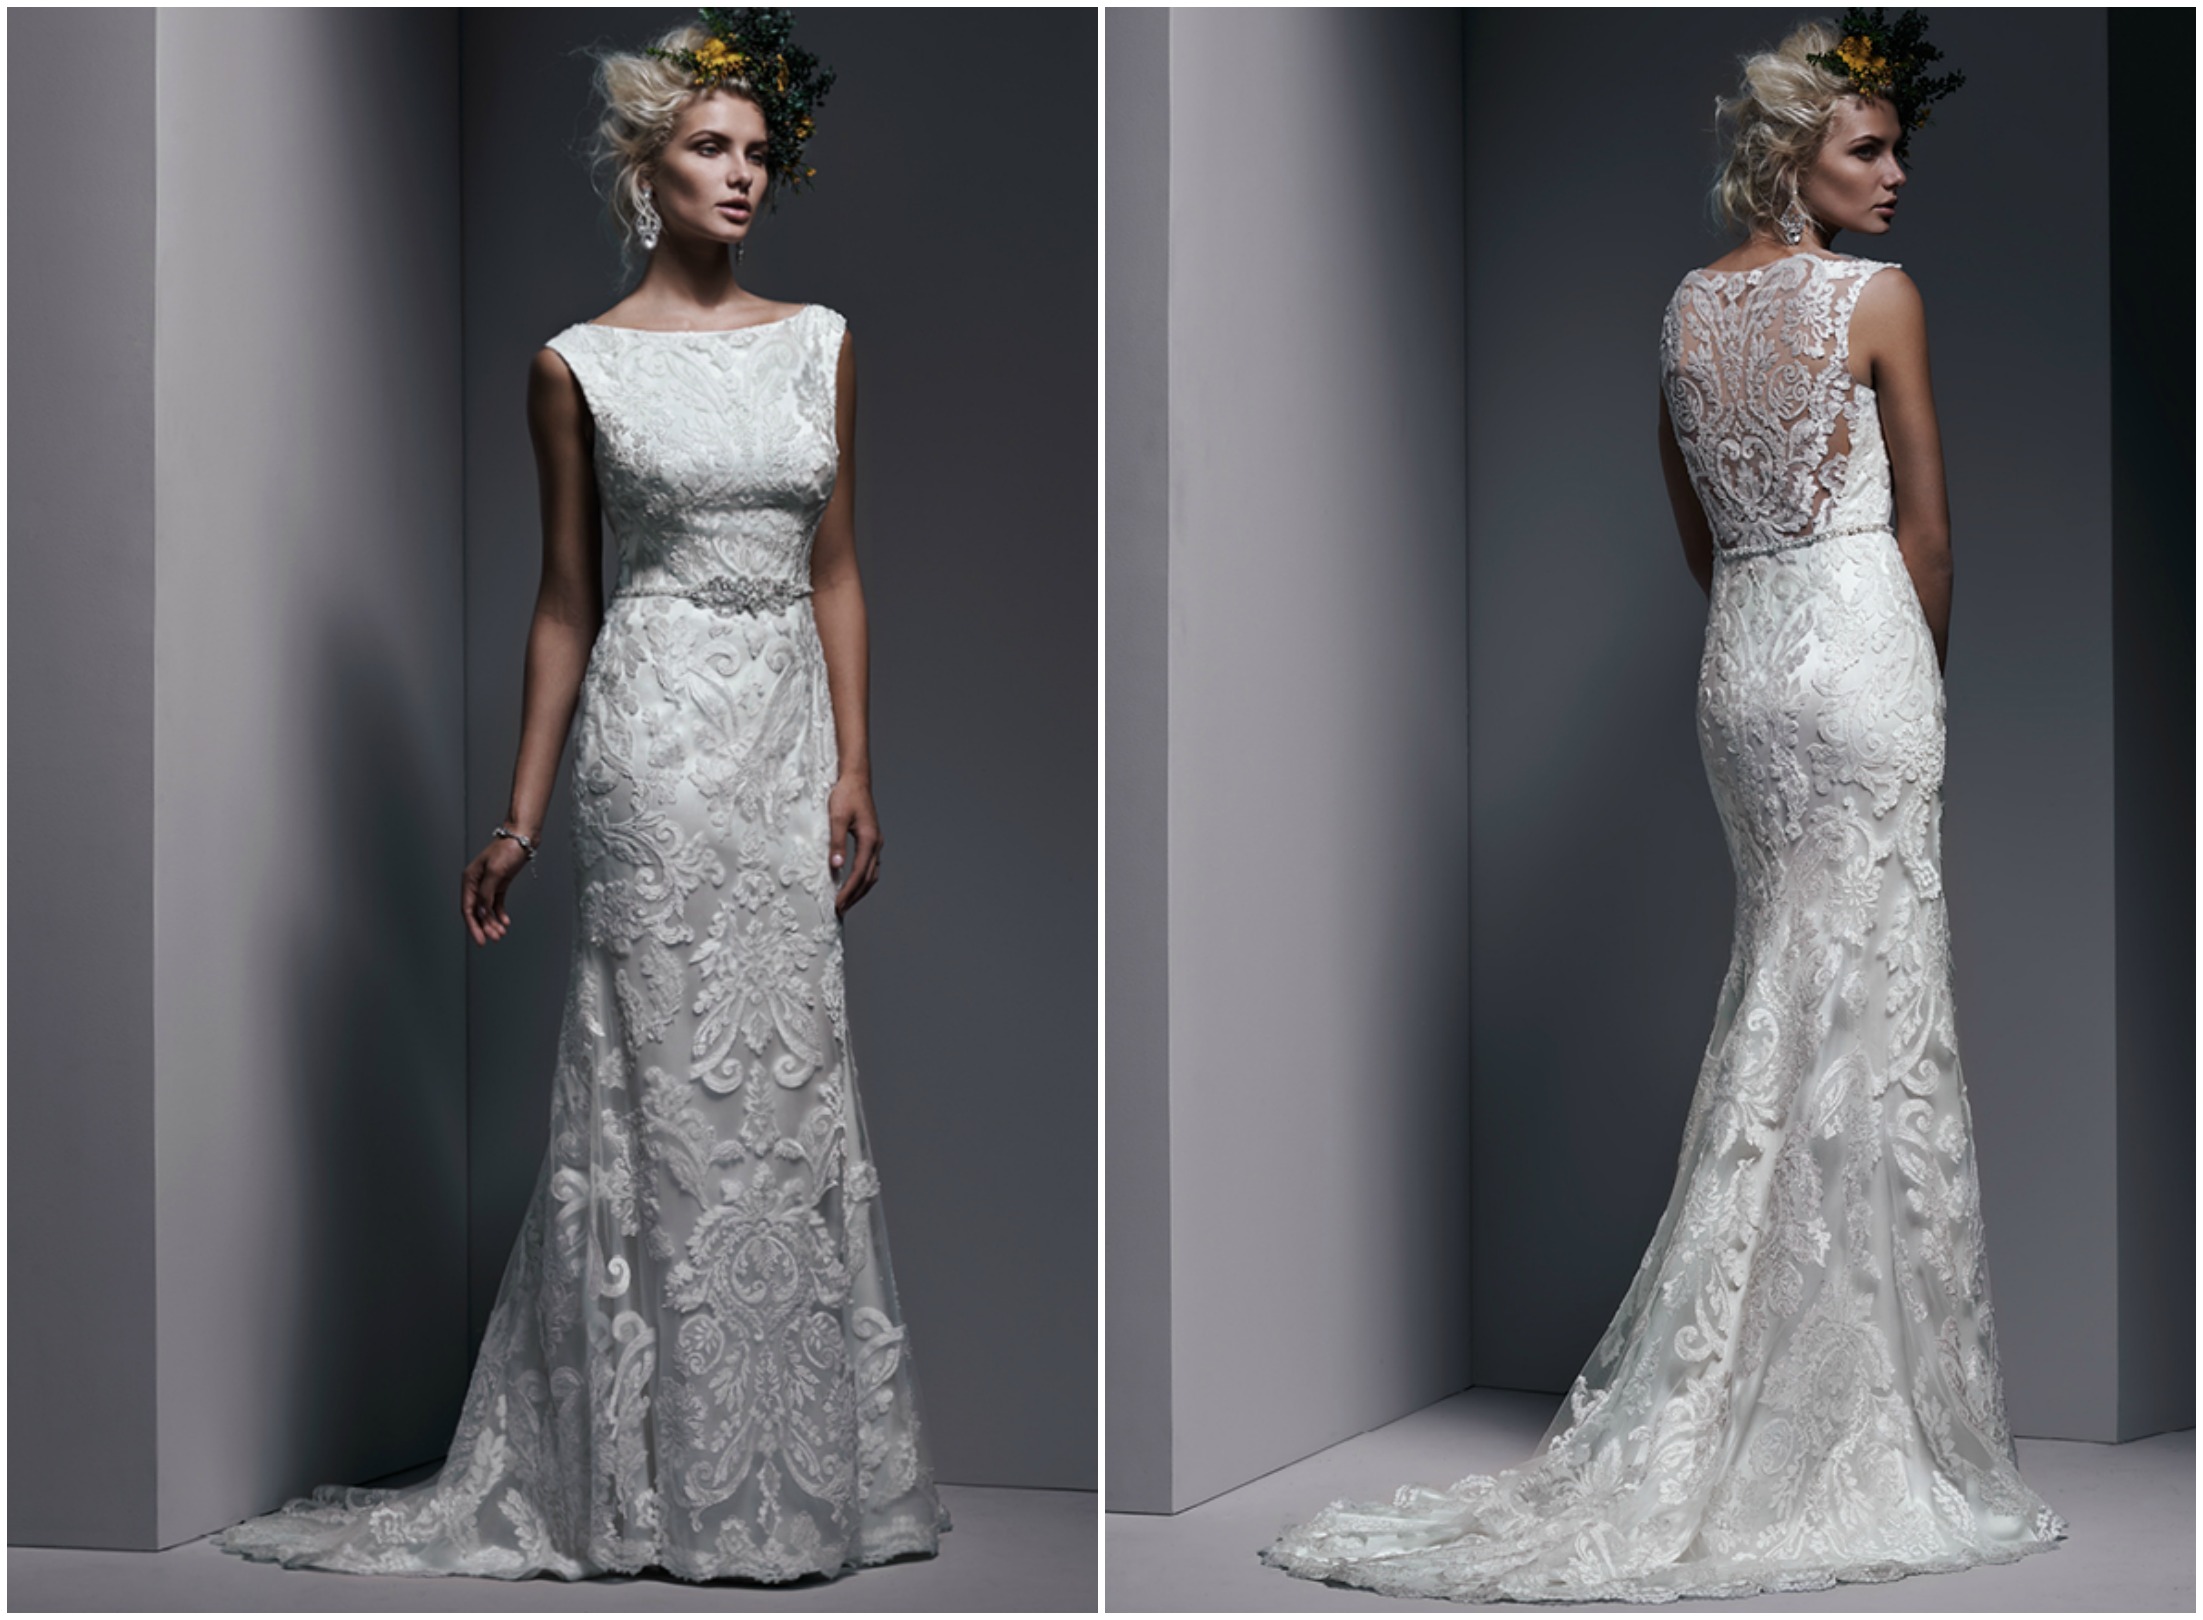 <a href="http://www.sotteroandmidgley.com/dress.aspx?style=5SW620&amp;page=0&amp;pageSize=36&amp;keywordText=&amp;keywordType=All" target="_blank">Sottero and Midgley 2016</a>